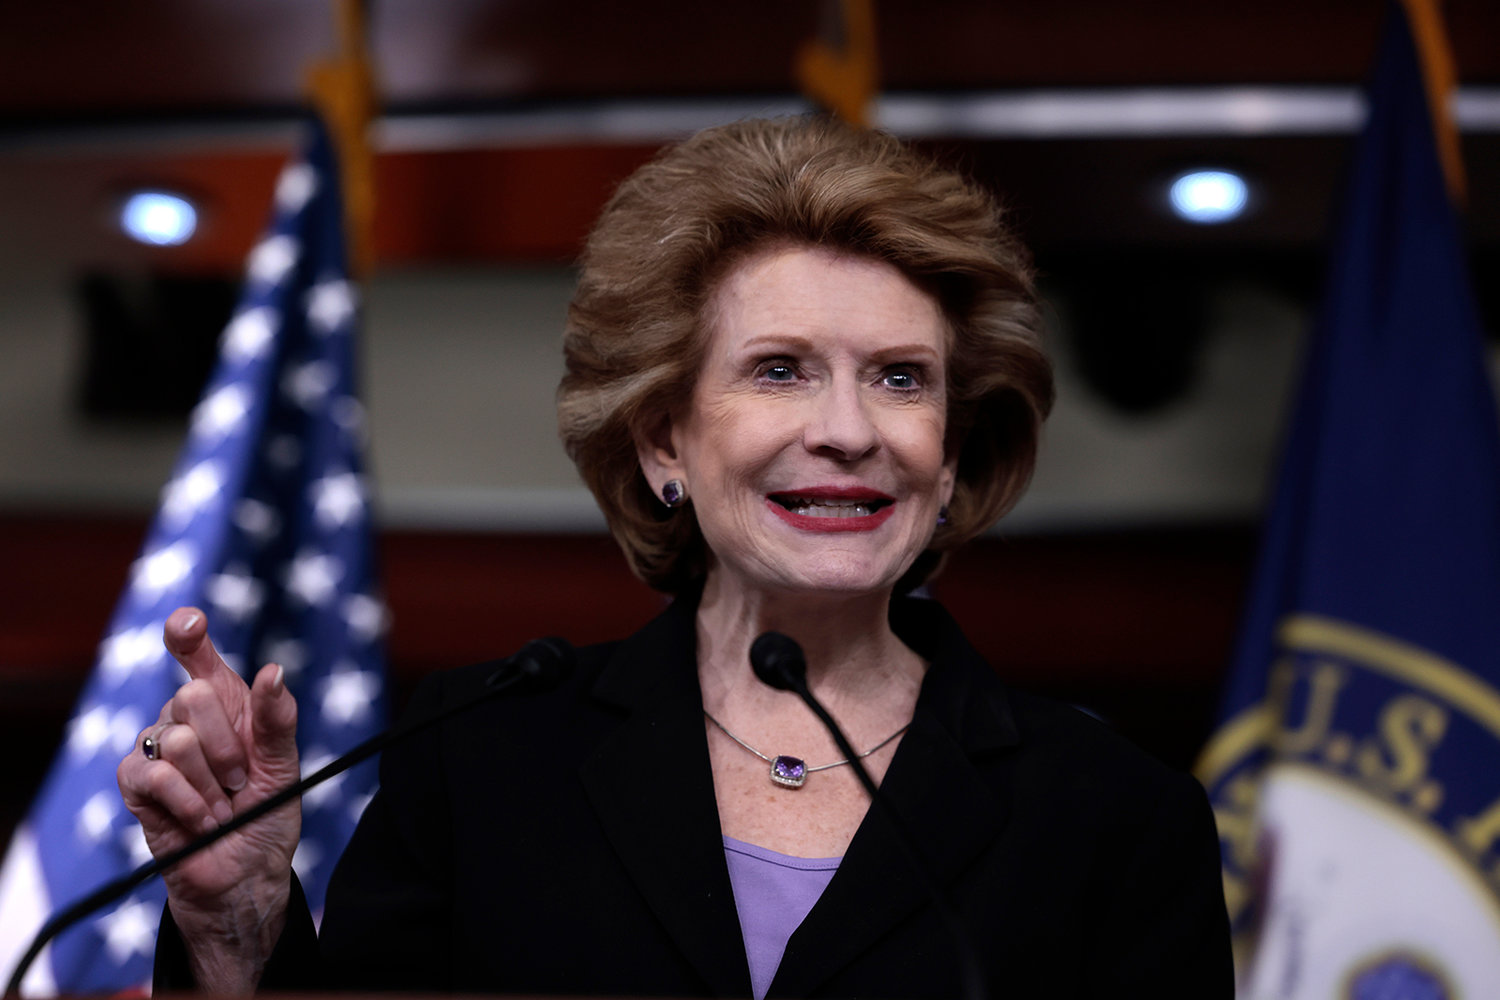 Sen. Debbie Stabenow (D-MI), the Senate Committee on Agriculture, Nutrition and Forestry Chairwoman speaks at a press conference on the introduction of legislation to help Americans with the nationwide baby formula shortage at the U.S. Capitol Building on May 17, 2022, in Washington, DC. (Anna Moneymaker/Getty Images/TNS)